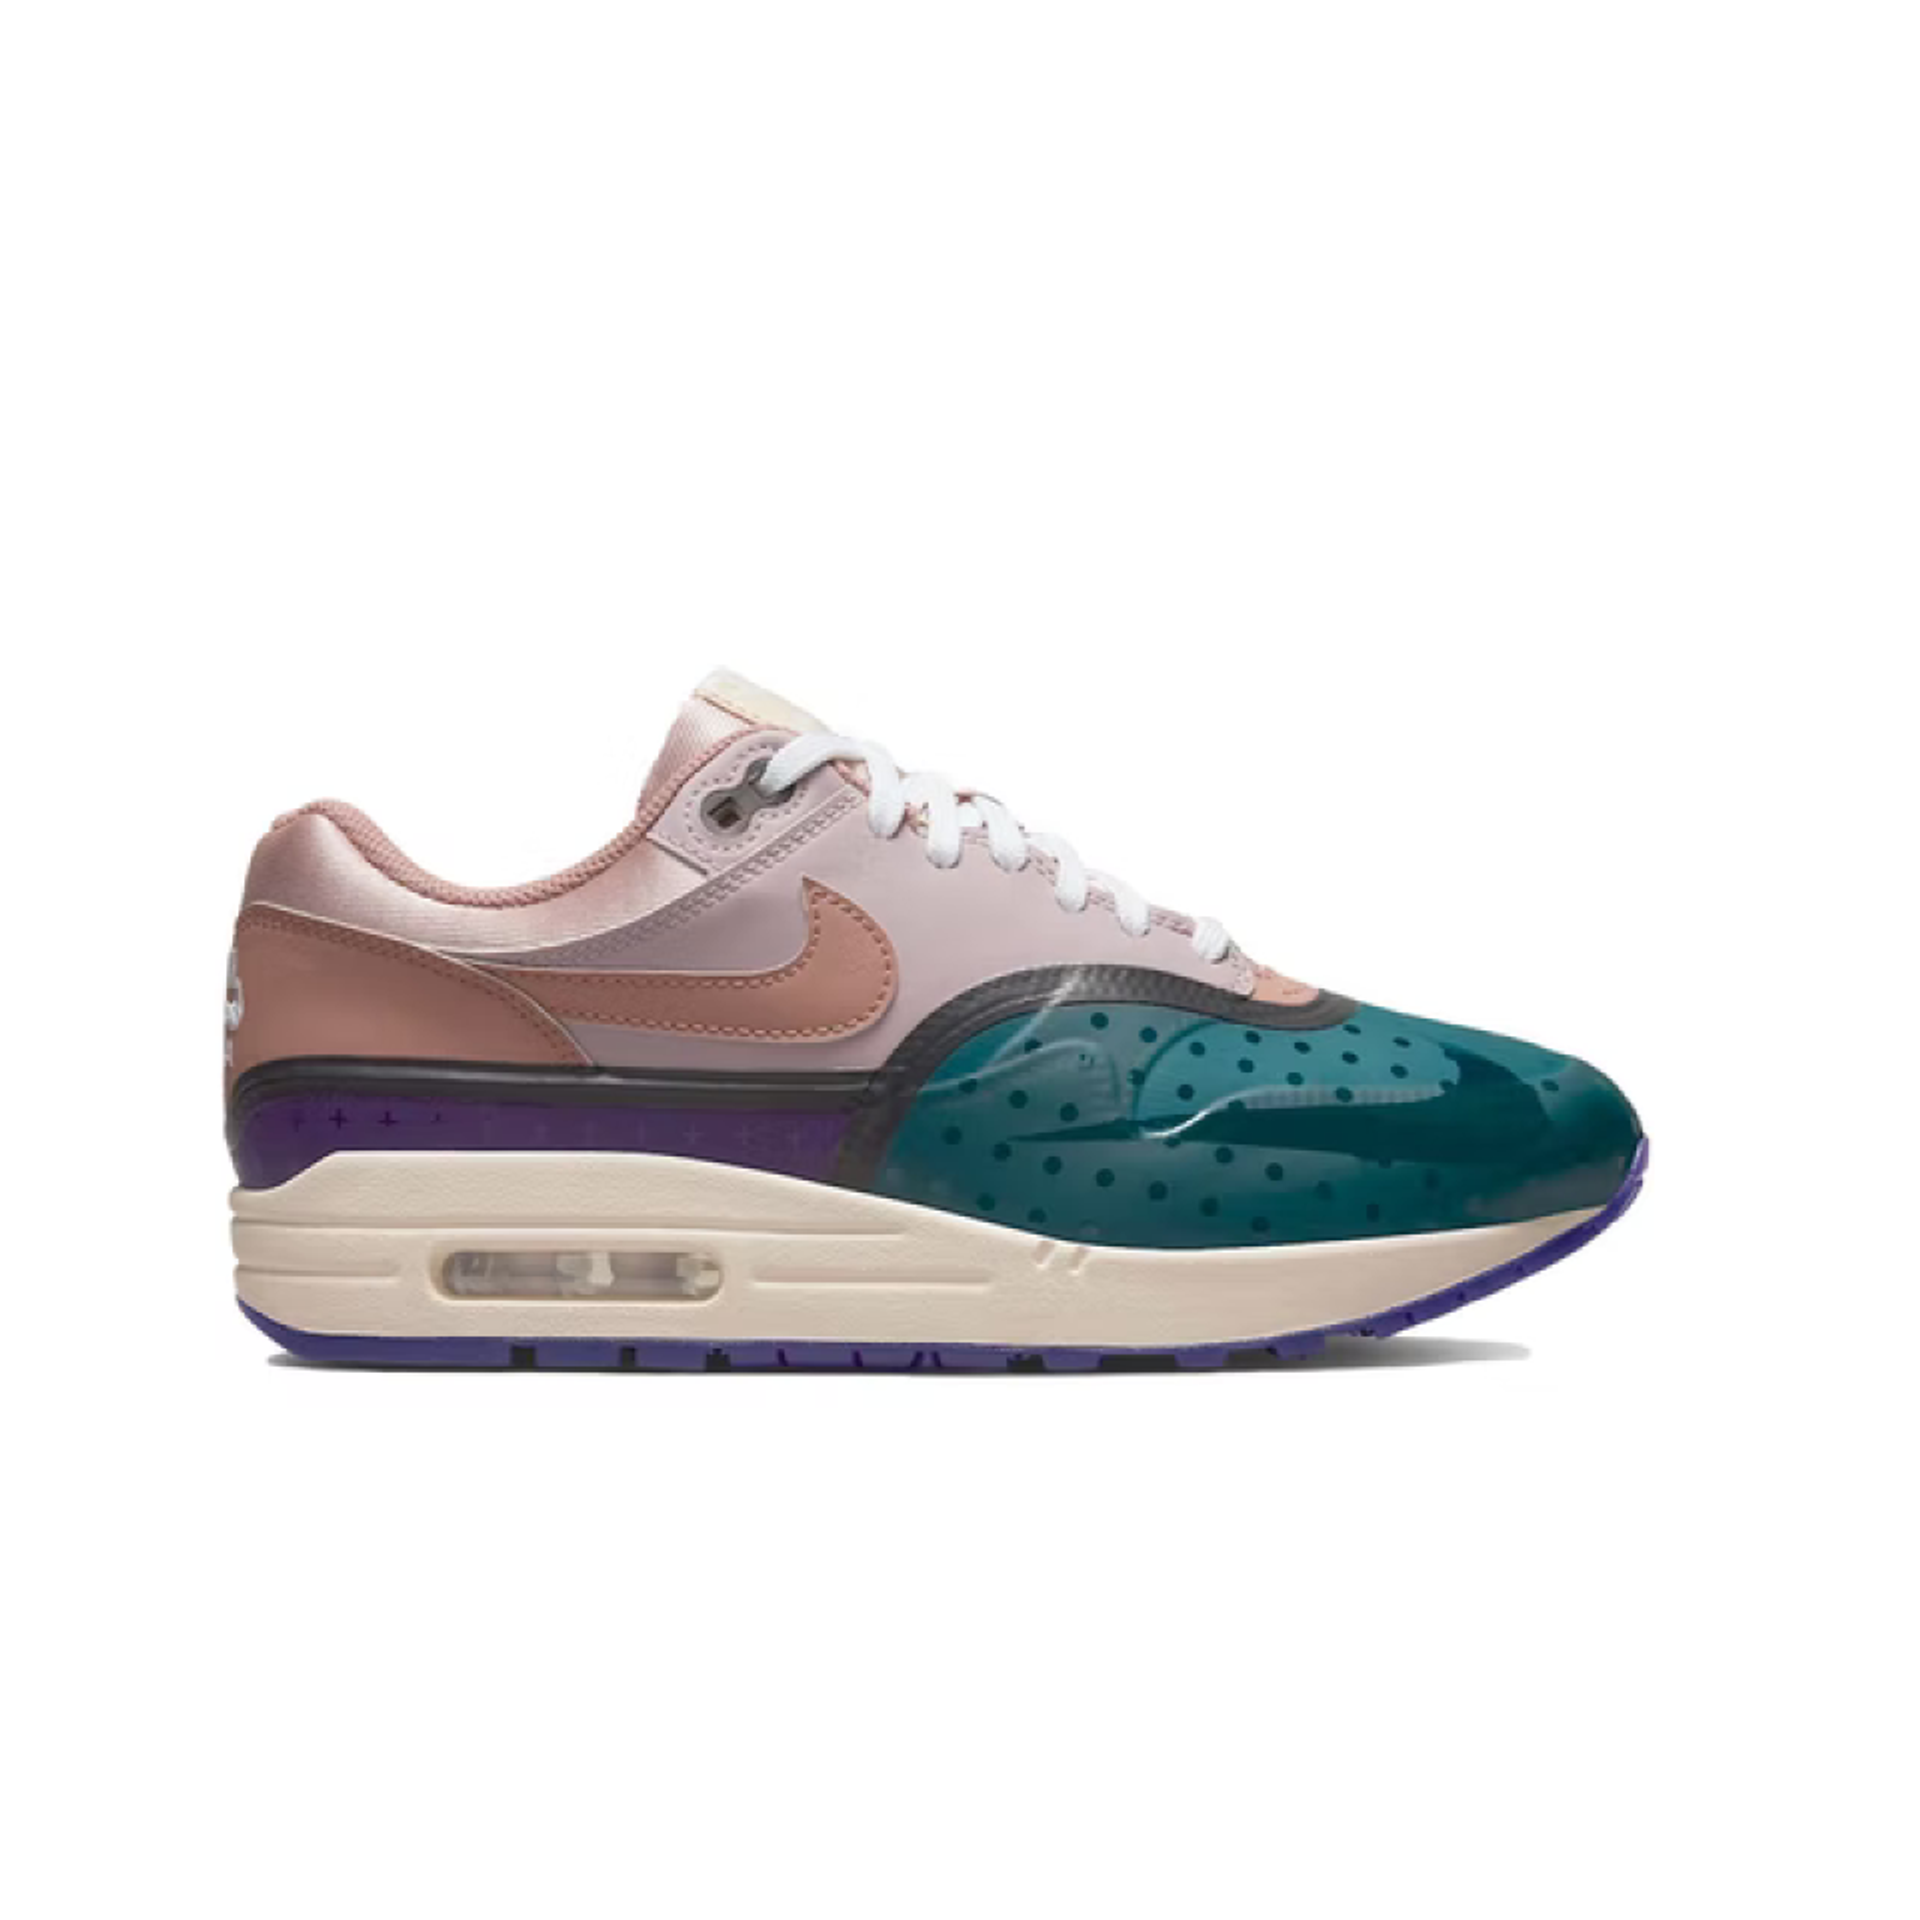 Nike Women's Air Max 1 "Plum Fog and Fossil Rose"